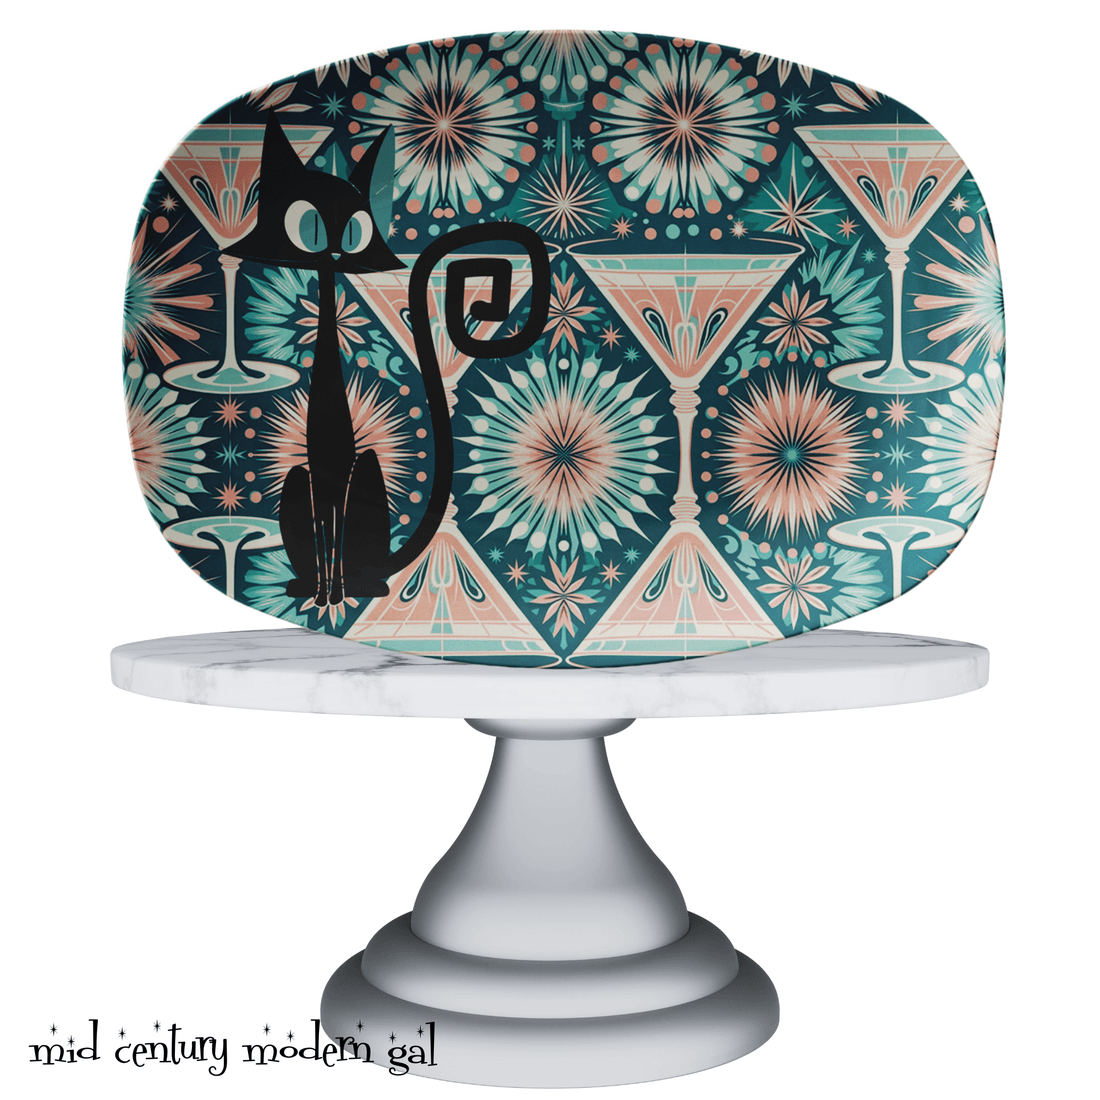 https://cdn.shopify.com/s/files/1/0521/9309/9931/files/default-atomic-cat-martini-cosmo-mid-century-modern-party-platter-36128361775259.png?v=1703743333&width=1100